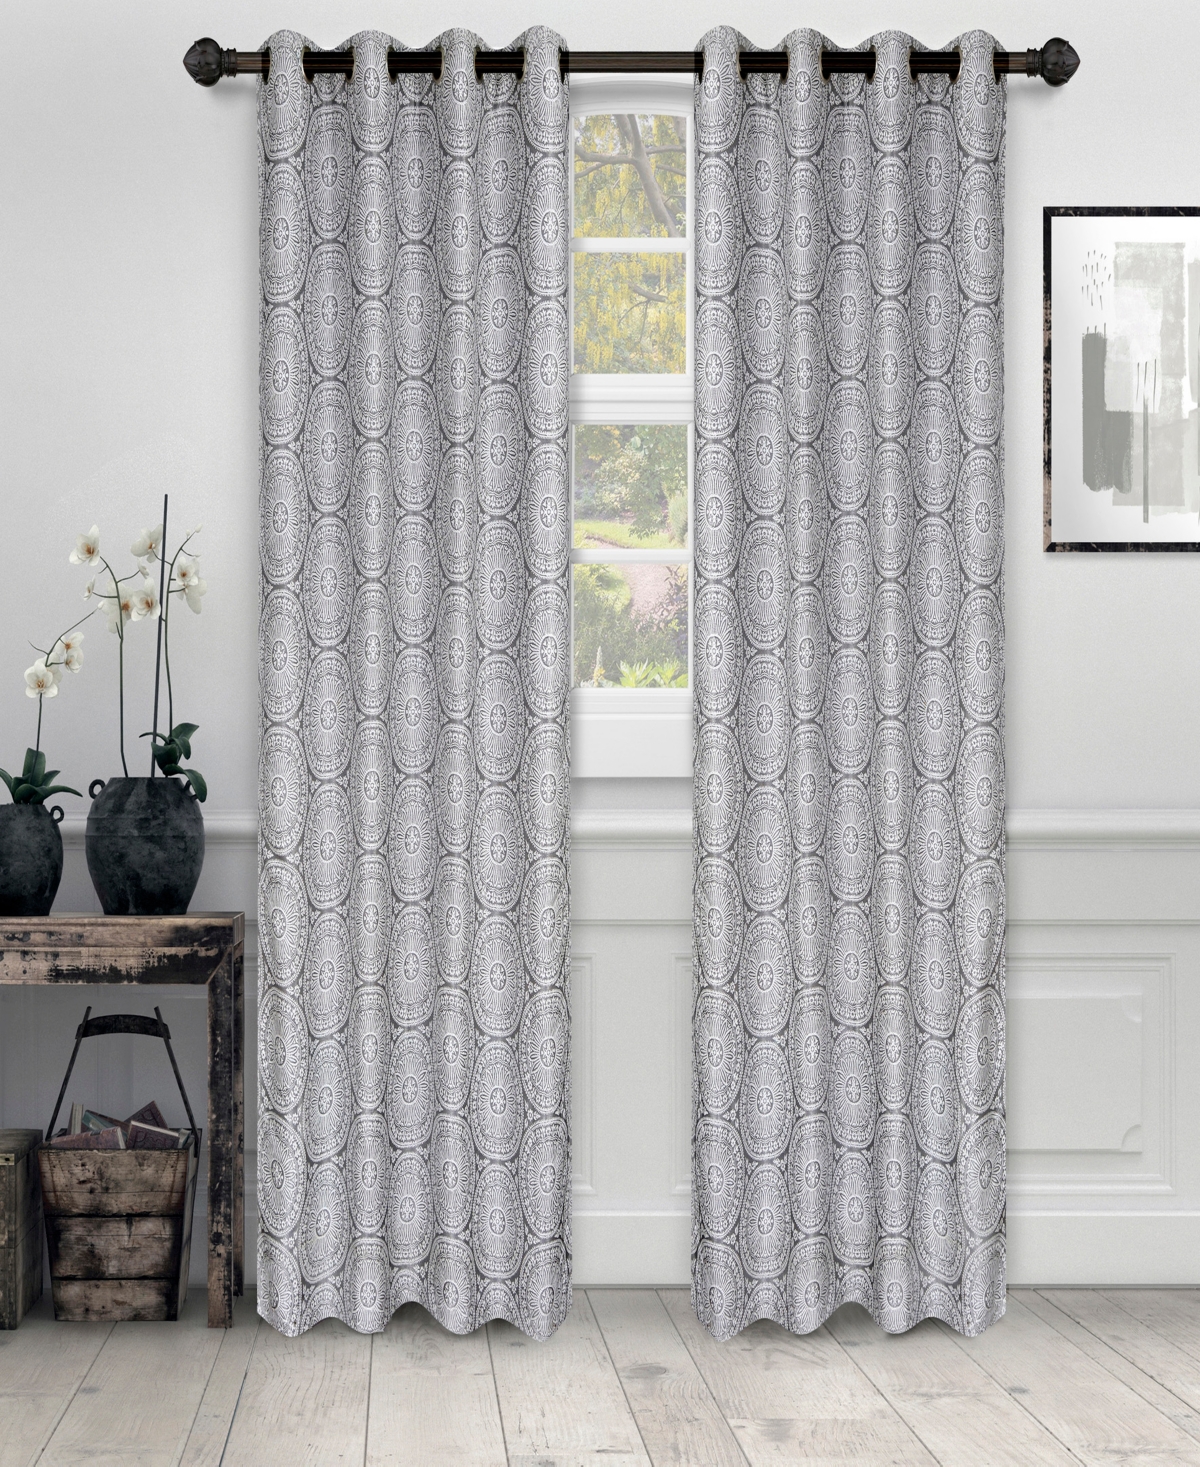 Traditional Eminence Jacquard 2-Piece Curtain Panels with Grommet Header Top, 52" X 63" - Silver